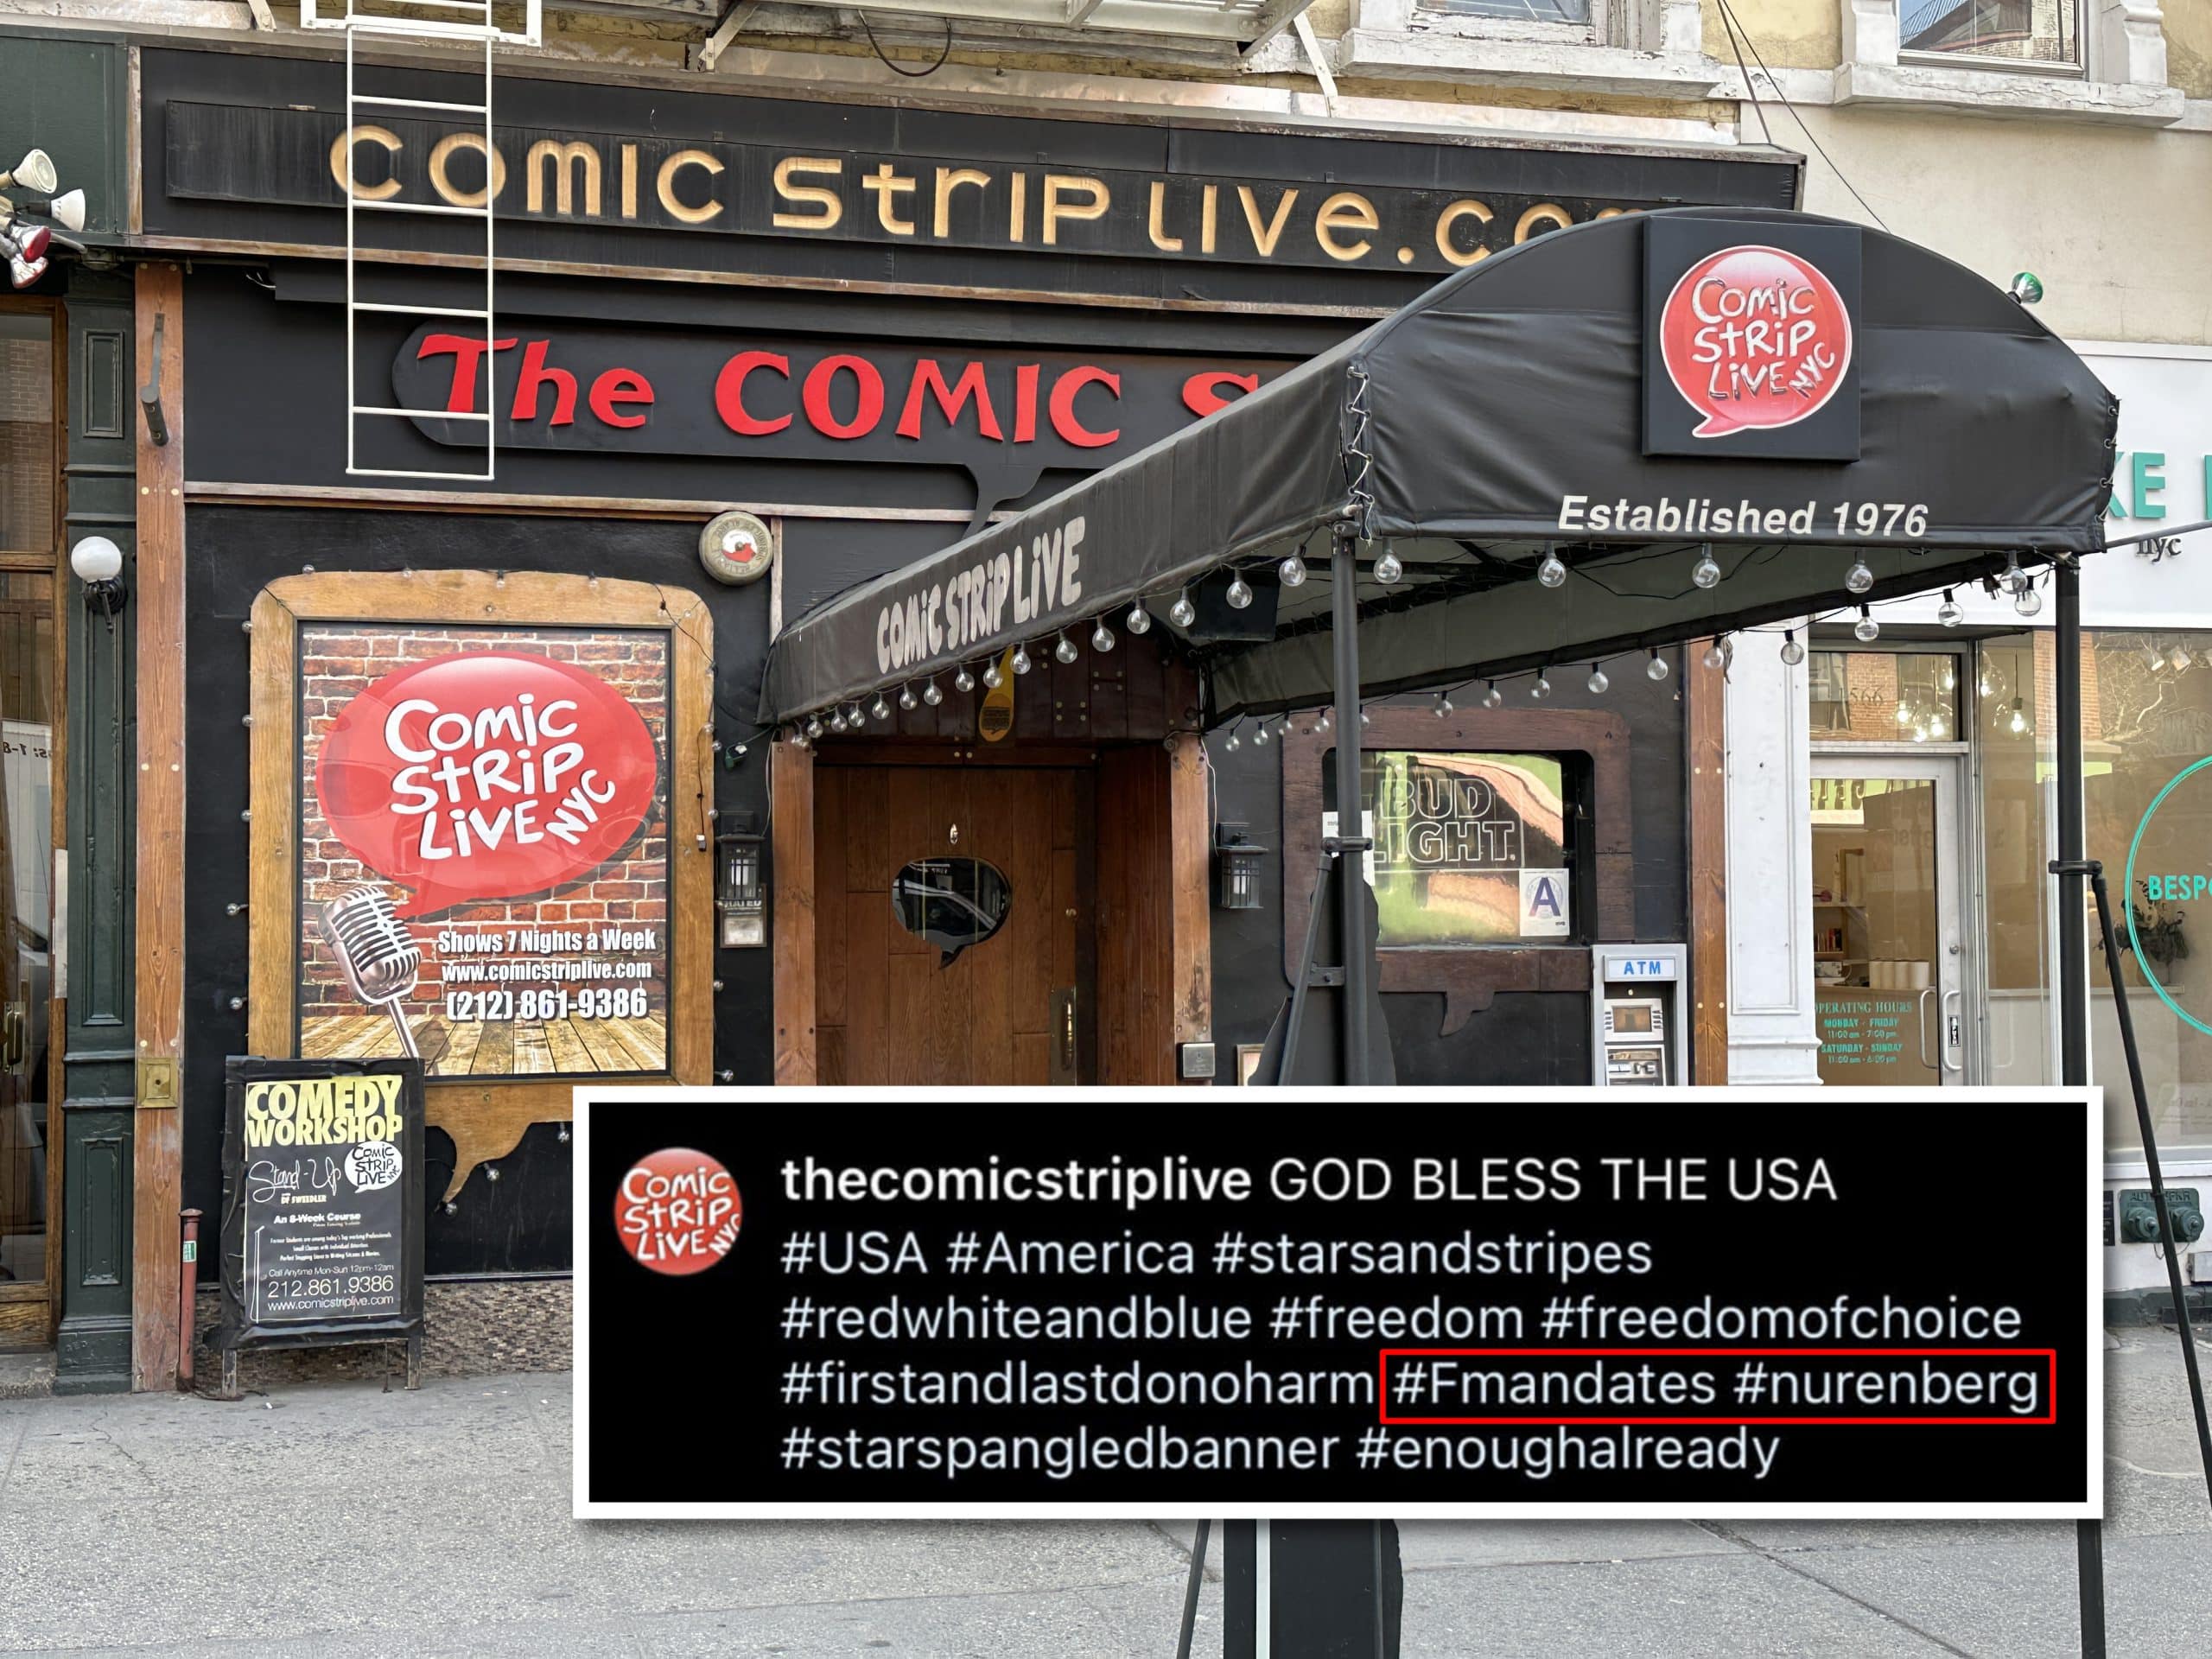 A judge has tossed a $3 million lawsuit against Upper East Site over reporting on The Comic Strip's antisemitic Instagram post | Upper East Site